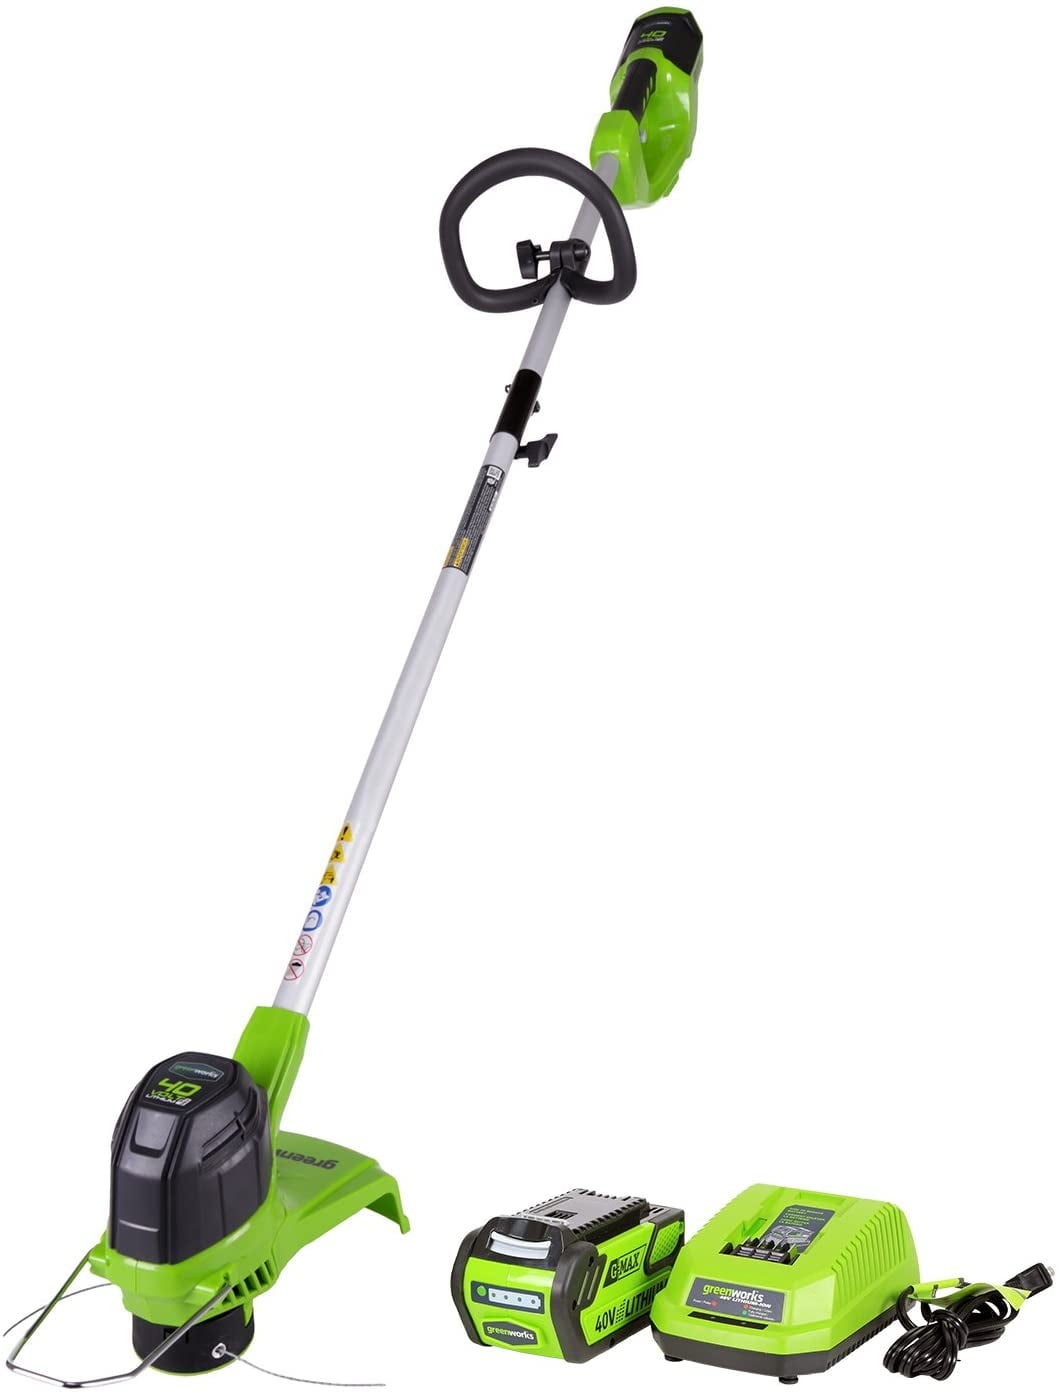 150 MPH Variable Speed Cordless Blower Batteries Not Included GreenWorks 13-Inch 40V Cordless String trimmer 